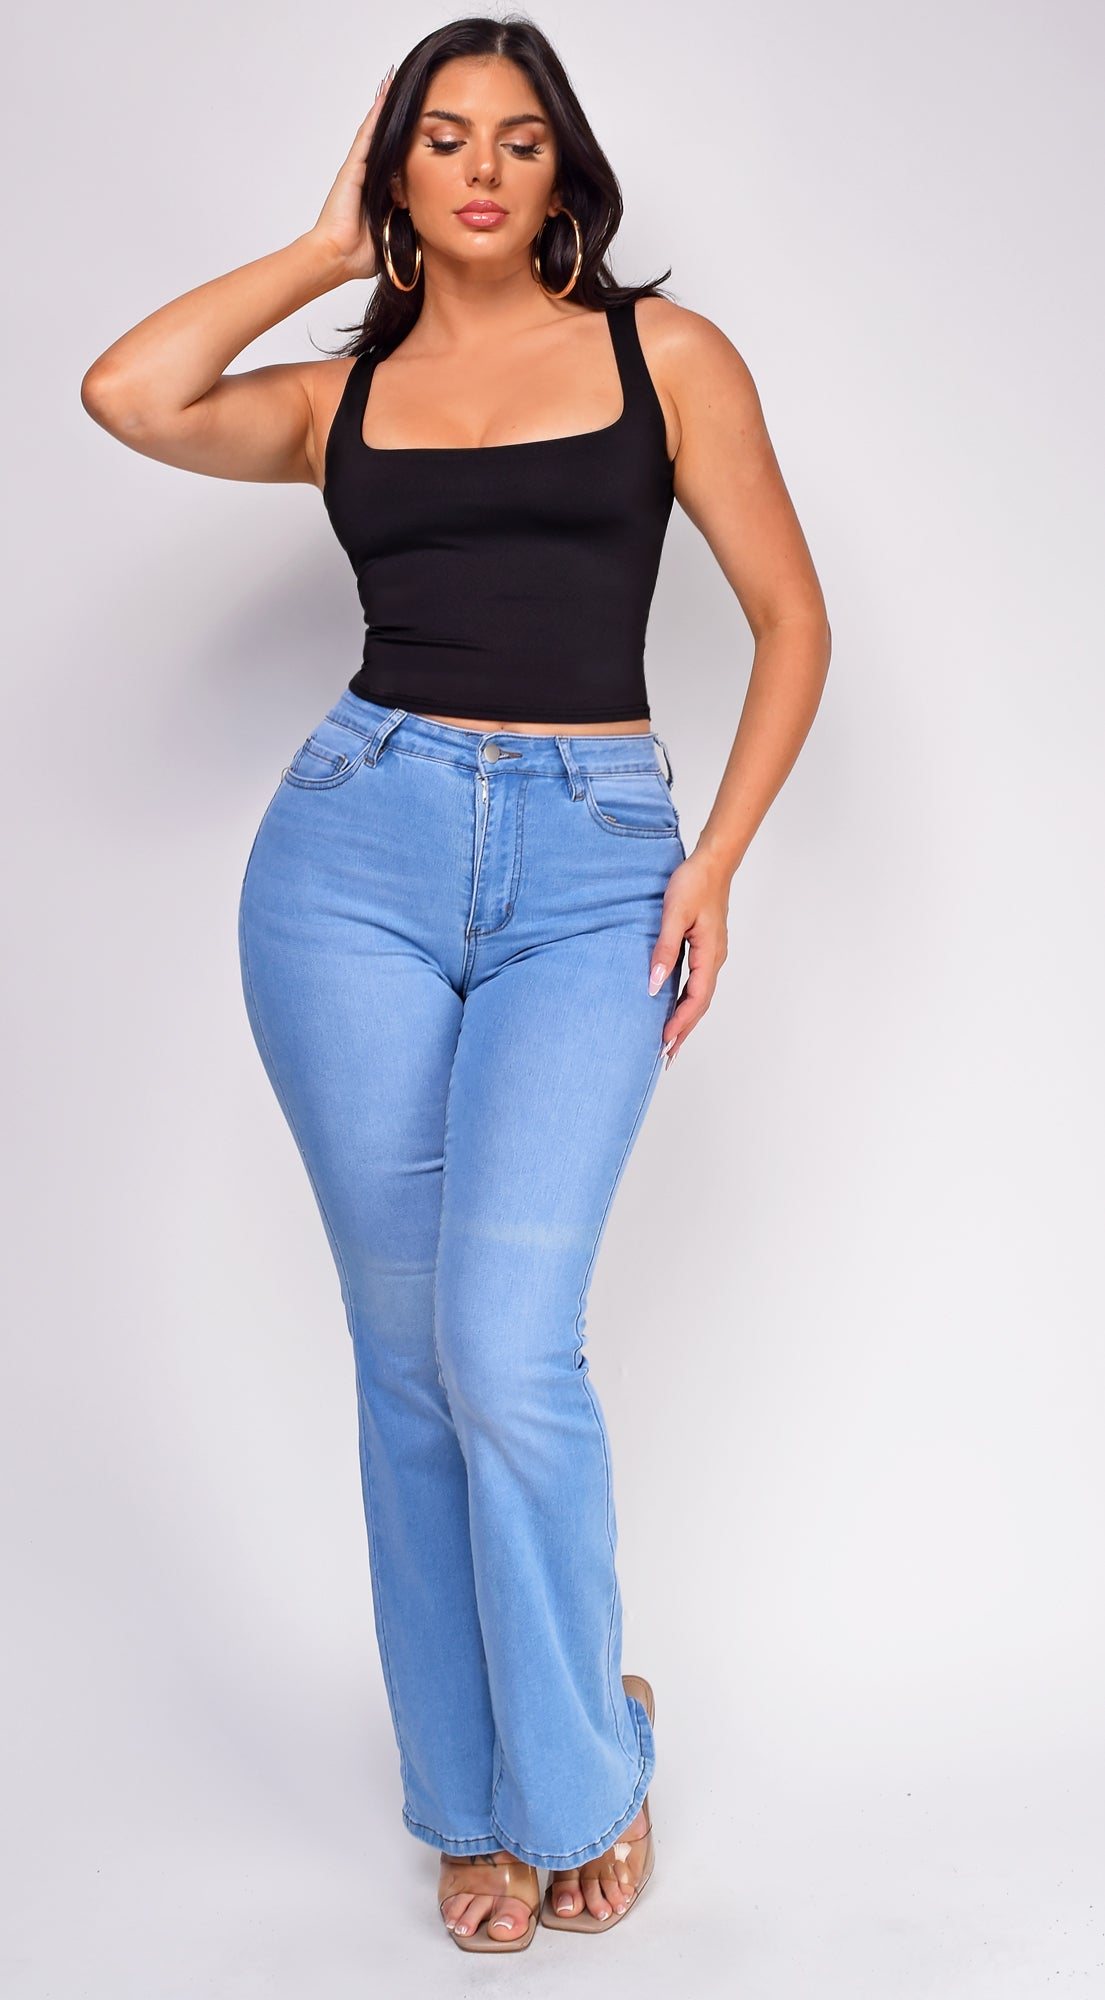 Aven Blue Light Wash High Rise Bootcut Flare Jeans